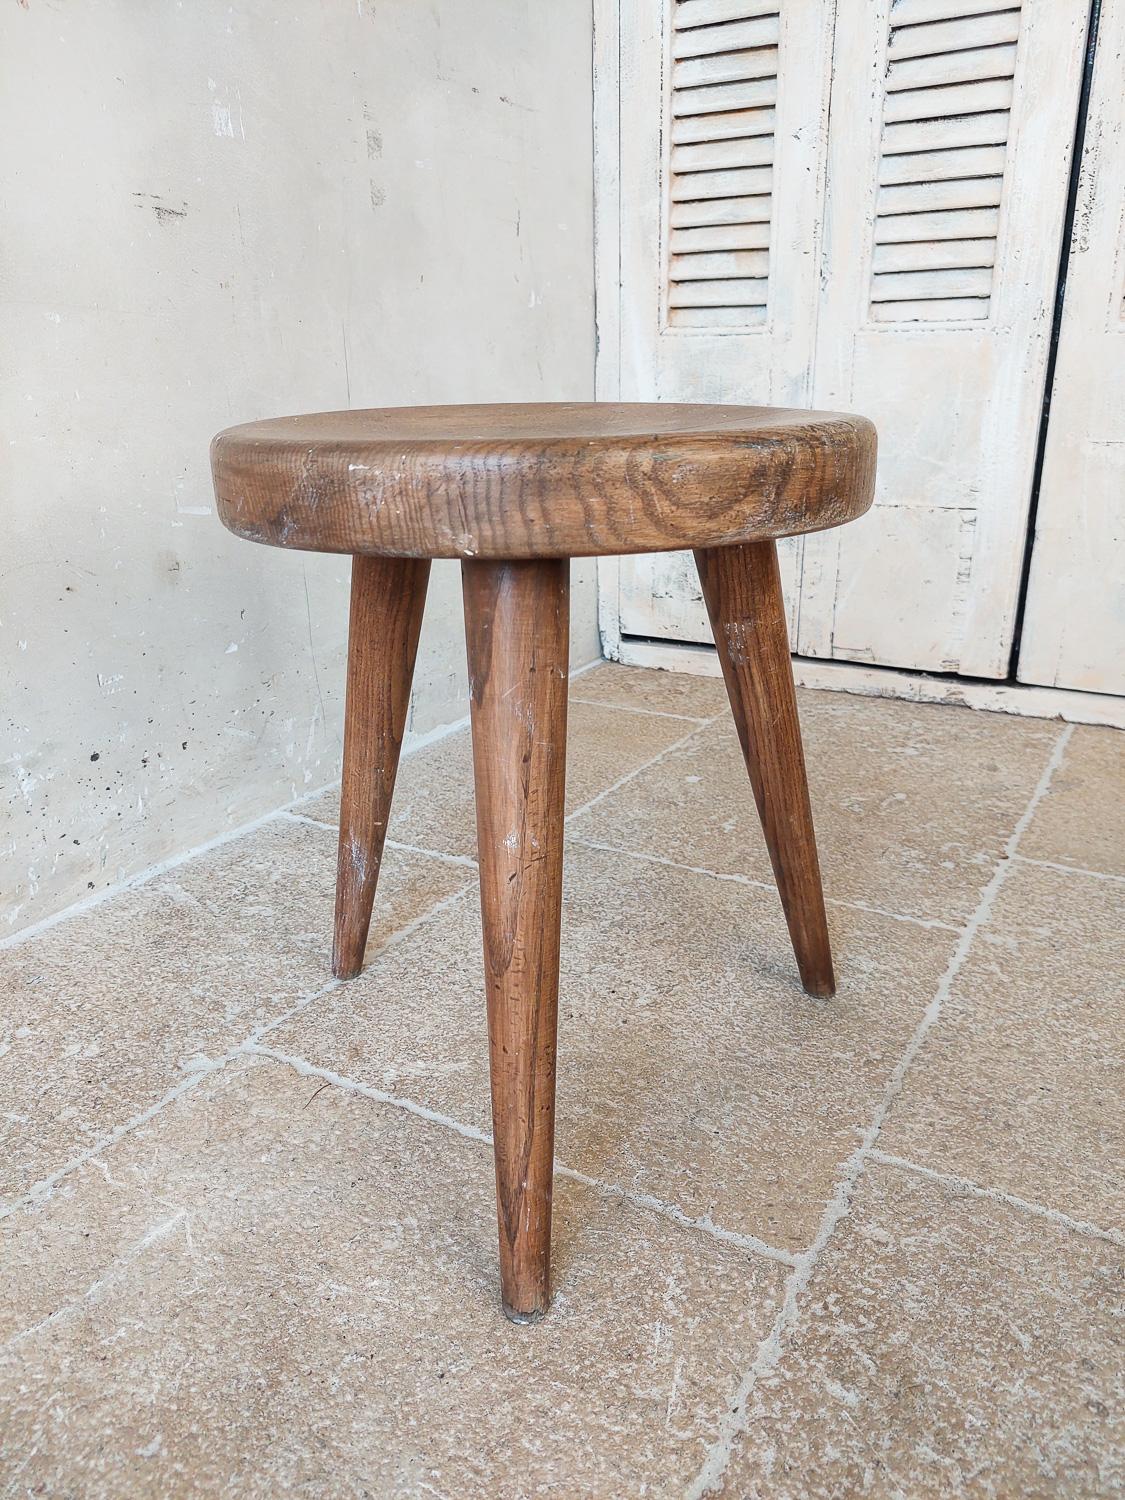 Charlotte Perriand Wooden Berger Stool, circa 1950 For Sale 5